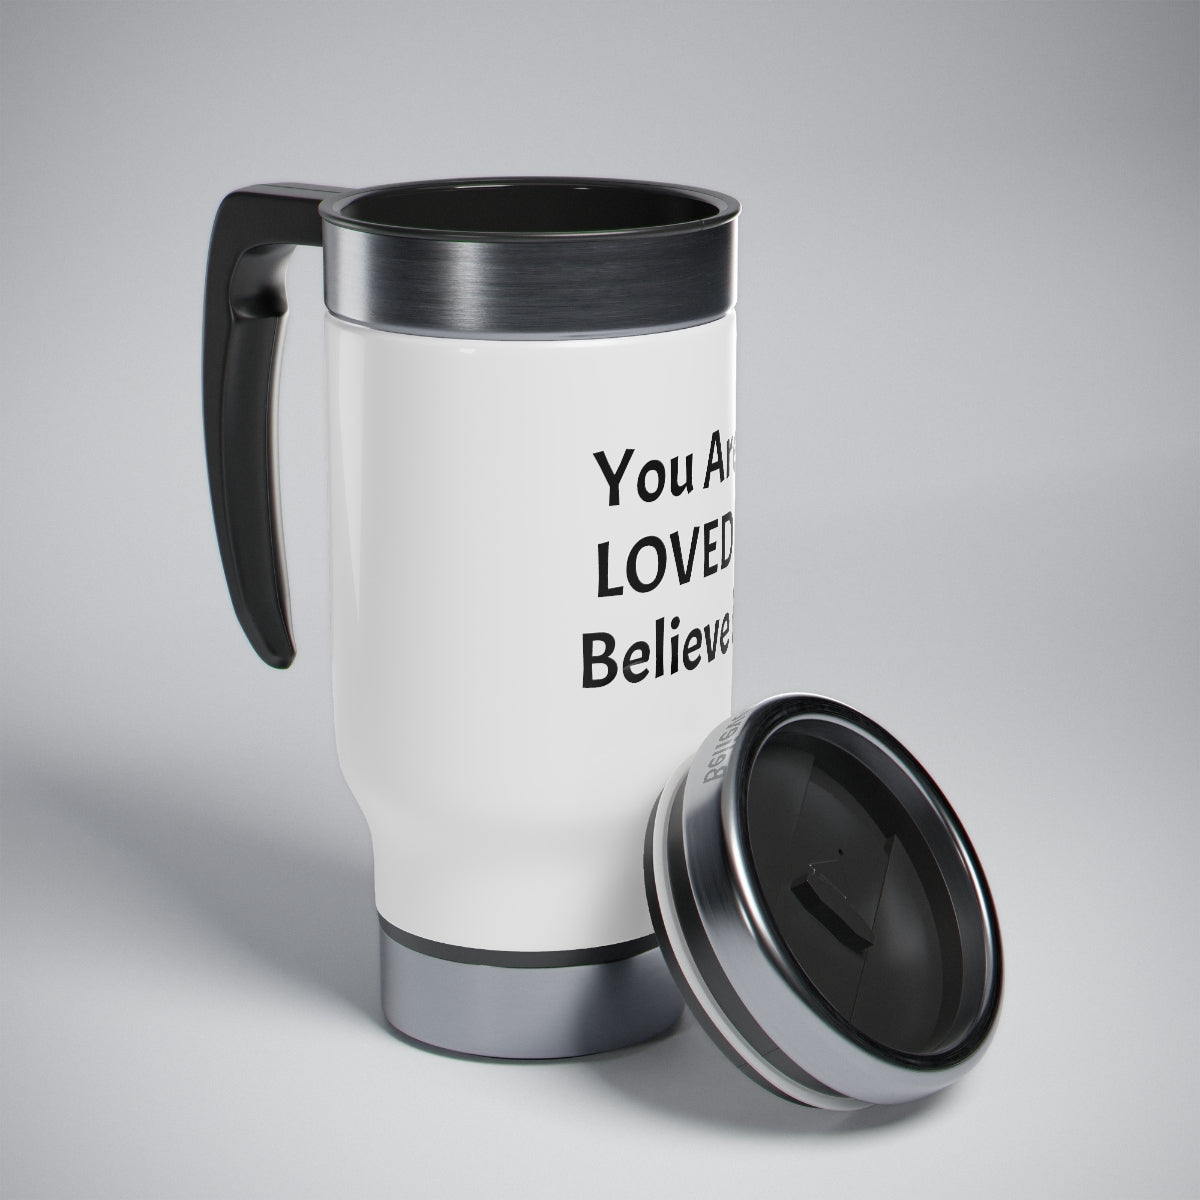 You Are Loved! Stainless Steel Travel Mug with Handle, 14oz